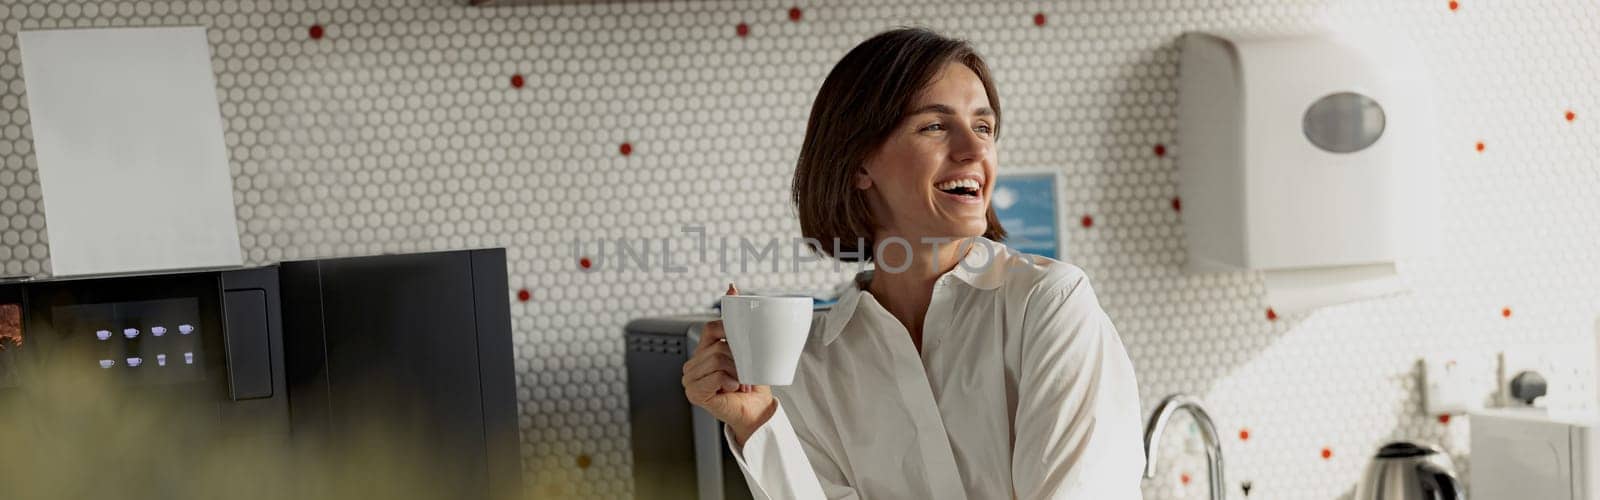 Business woman in casual clothes drinking coffee in office kitchen during break. High quality photo